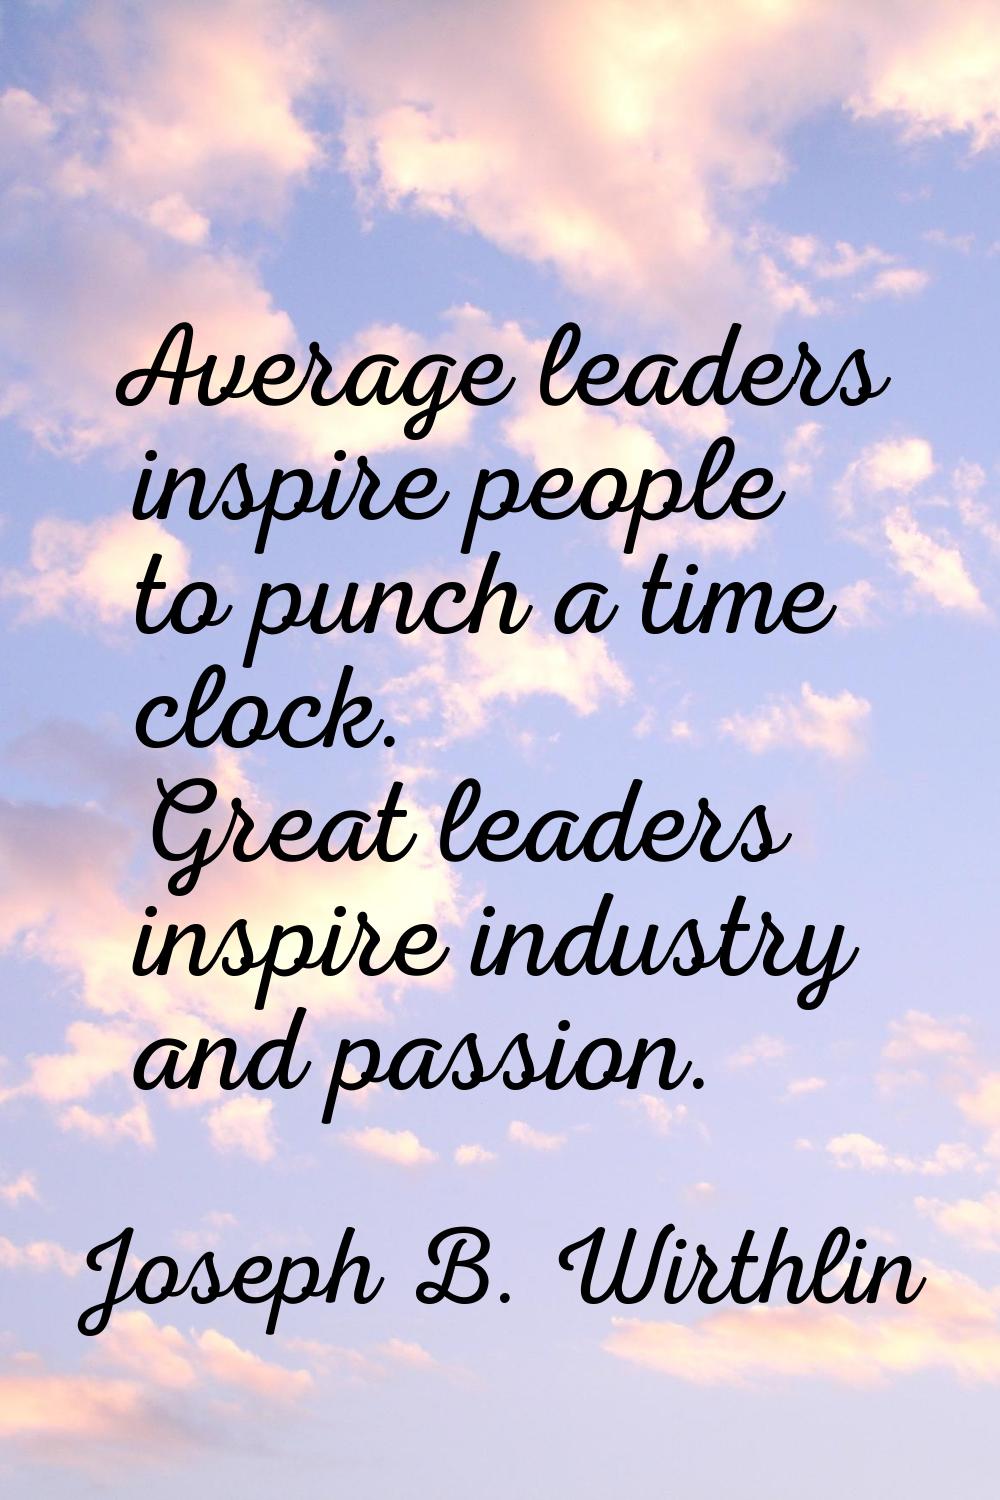 Average leaders inspire people to punch a time clock. Great leaders inspire industry and passion.